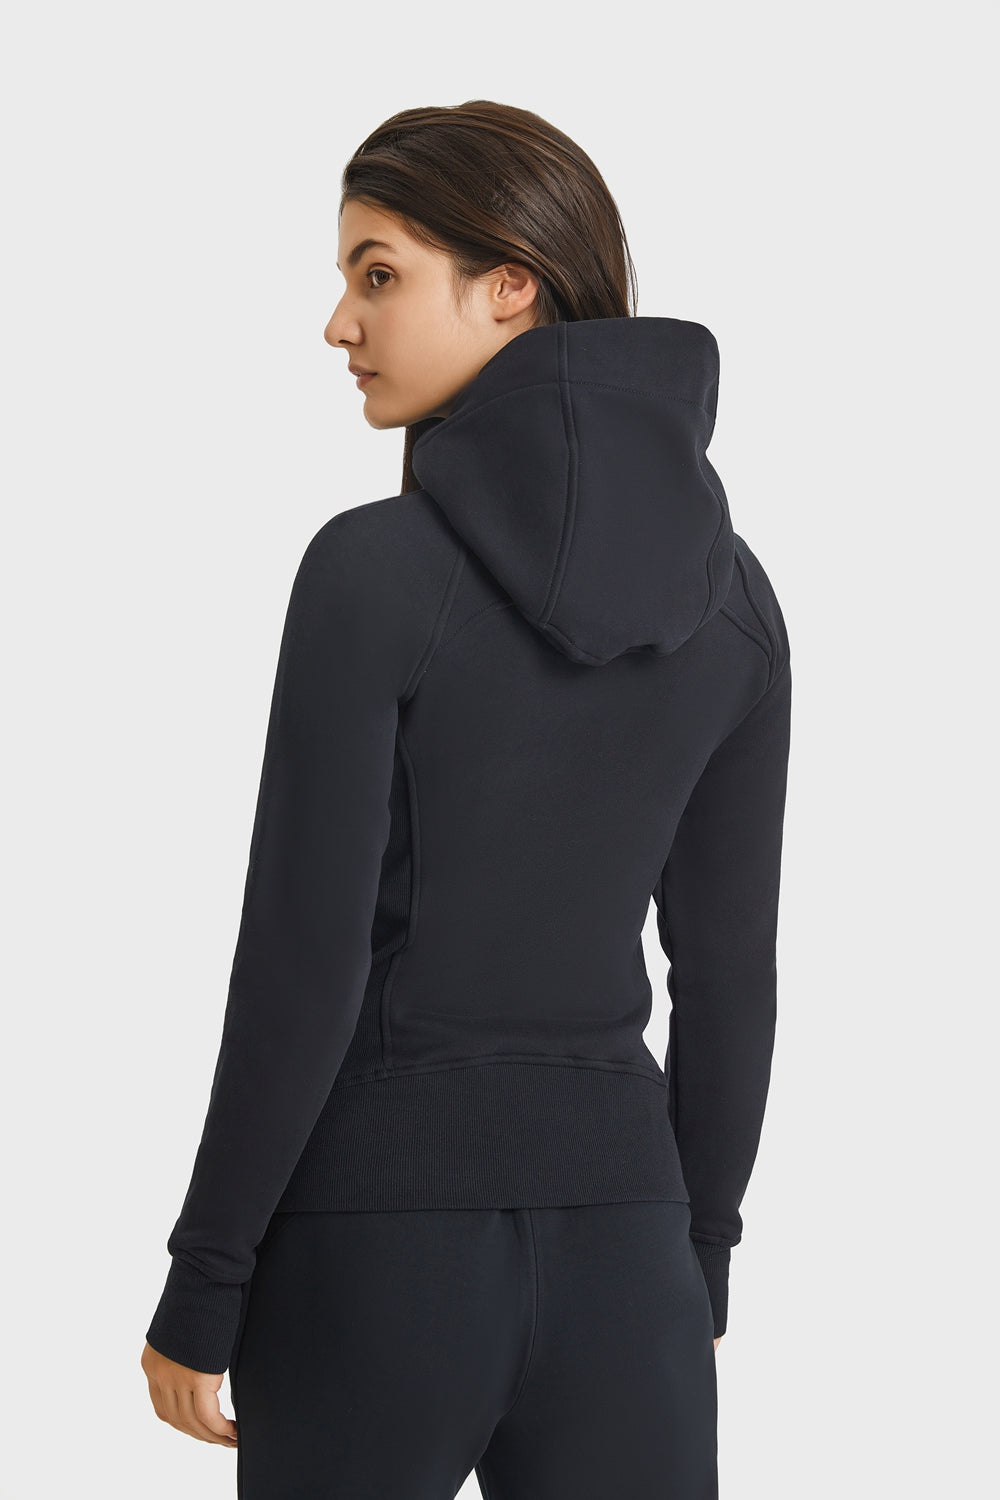 Zip Up Seam Detail Hooded Sports Jacket Print on any thing USA/STOD clothes